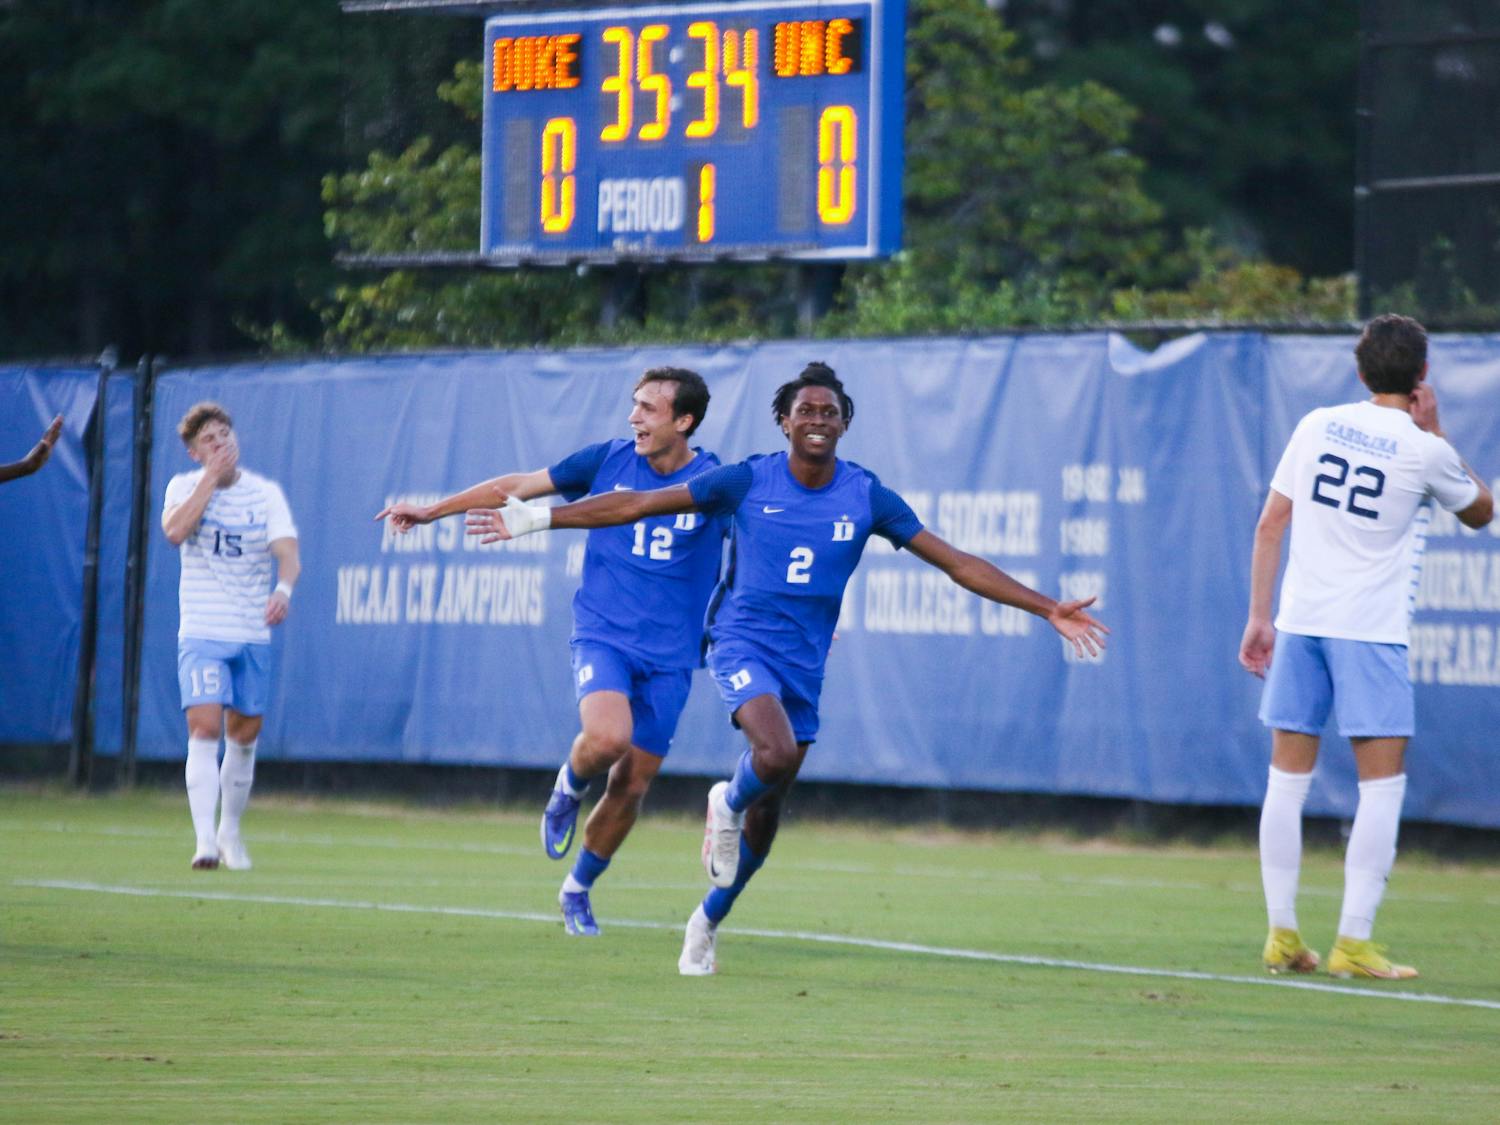 Ruben Mesalles and Amir Daley combined for Duke's lone goal against North Carolina.